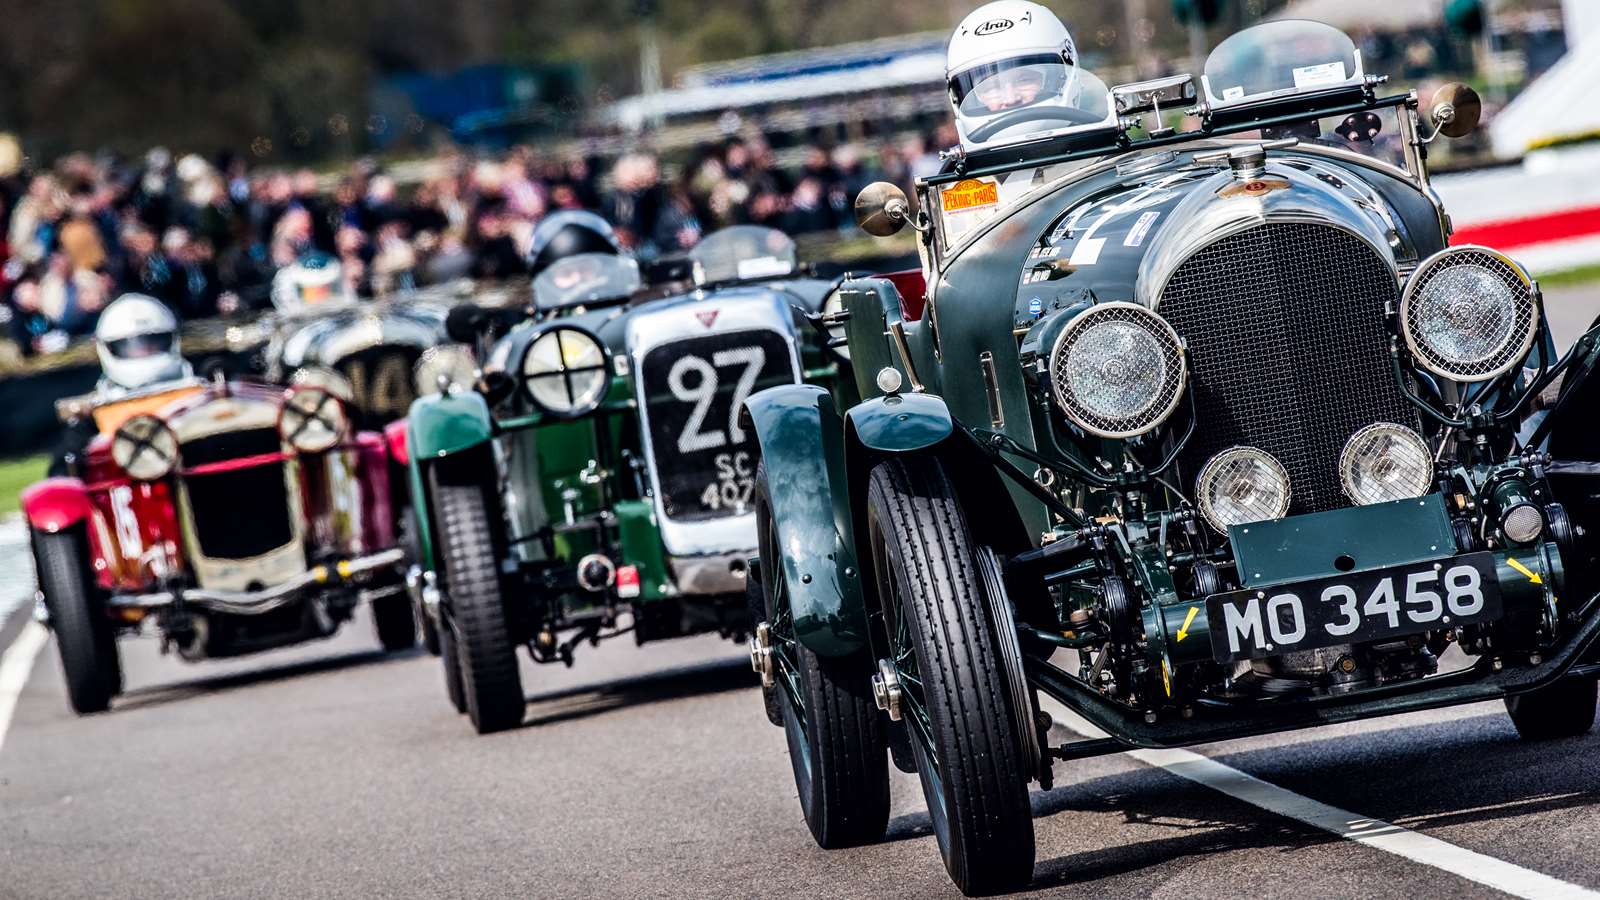 Old cars racing on track at the Goodwood Motor Circuit at the 77th Members' Meeting